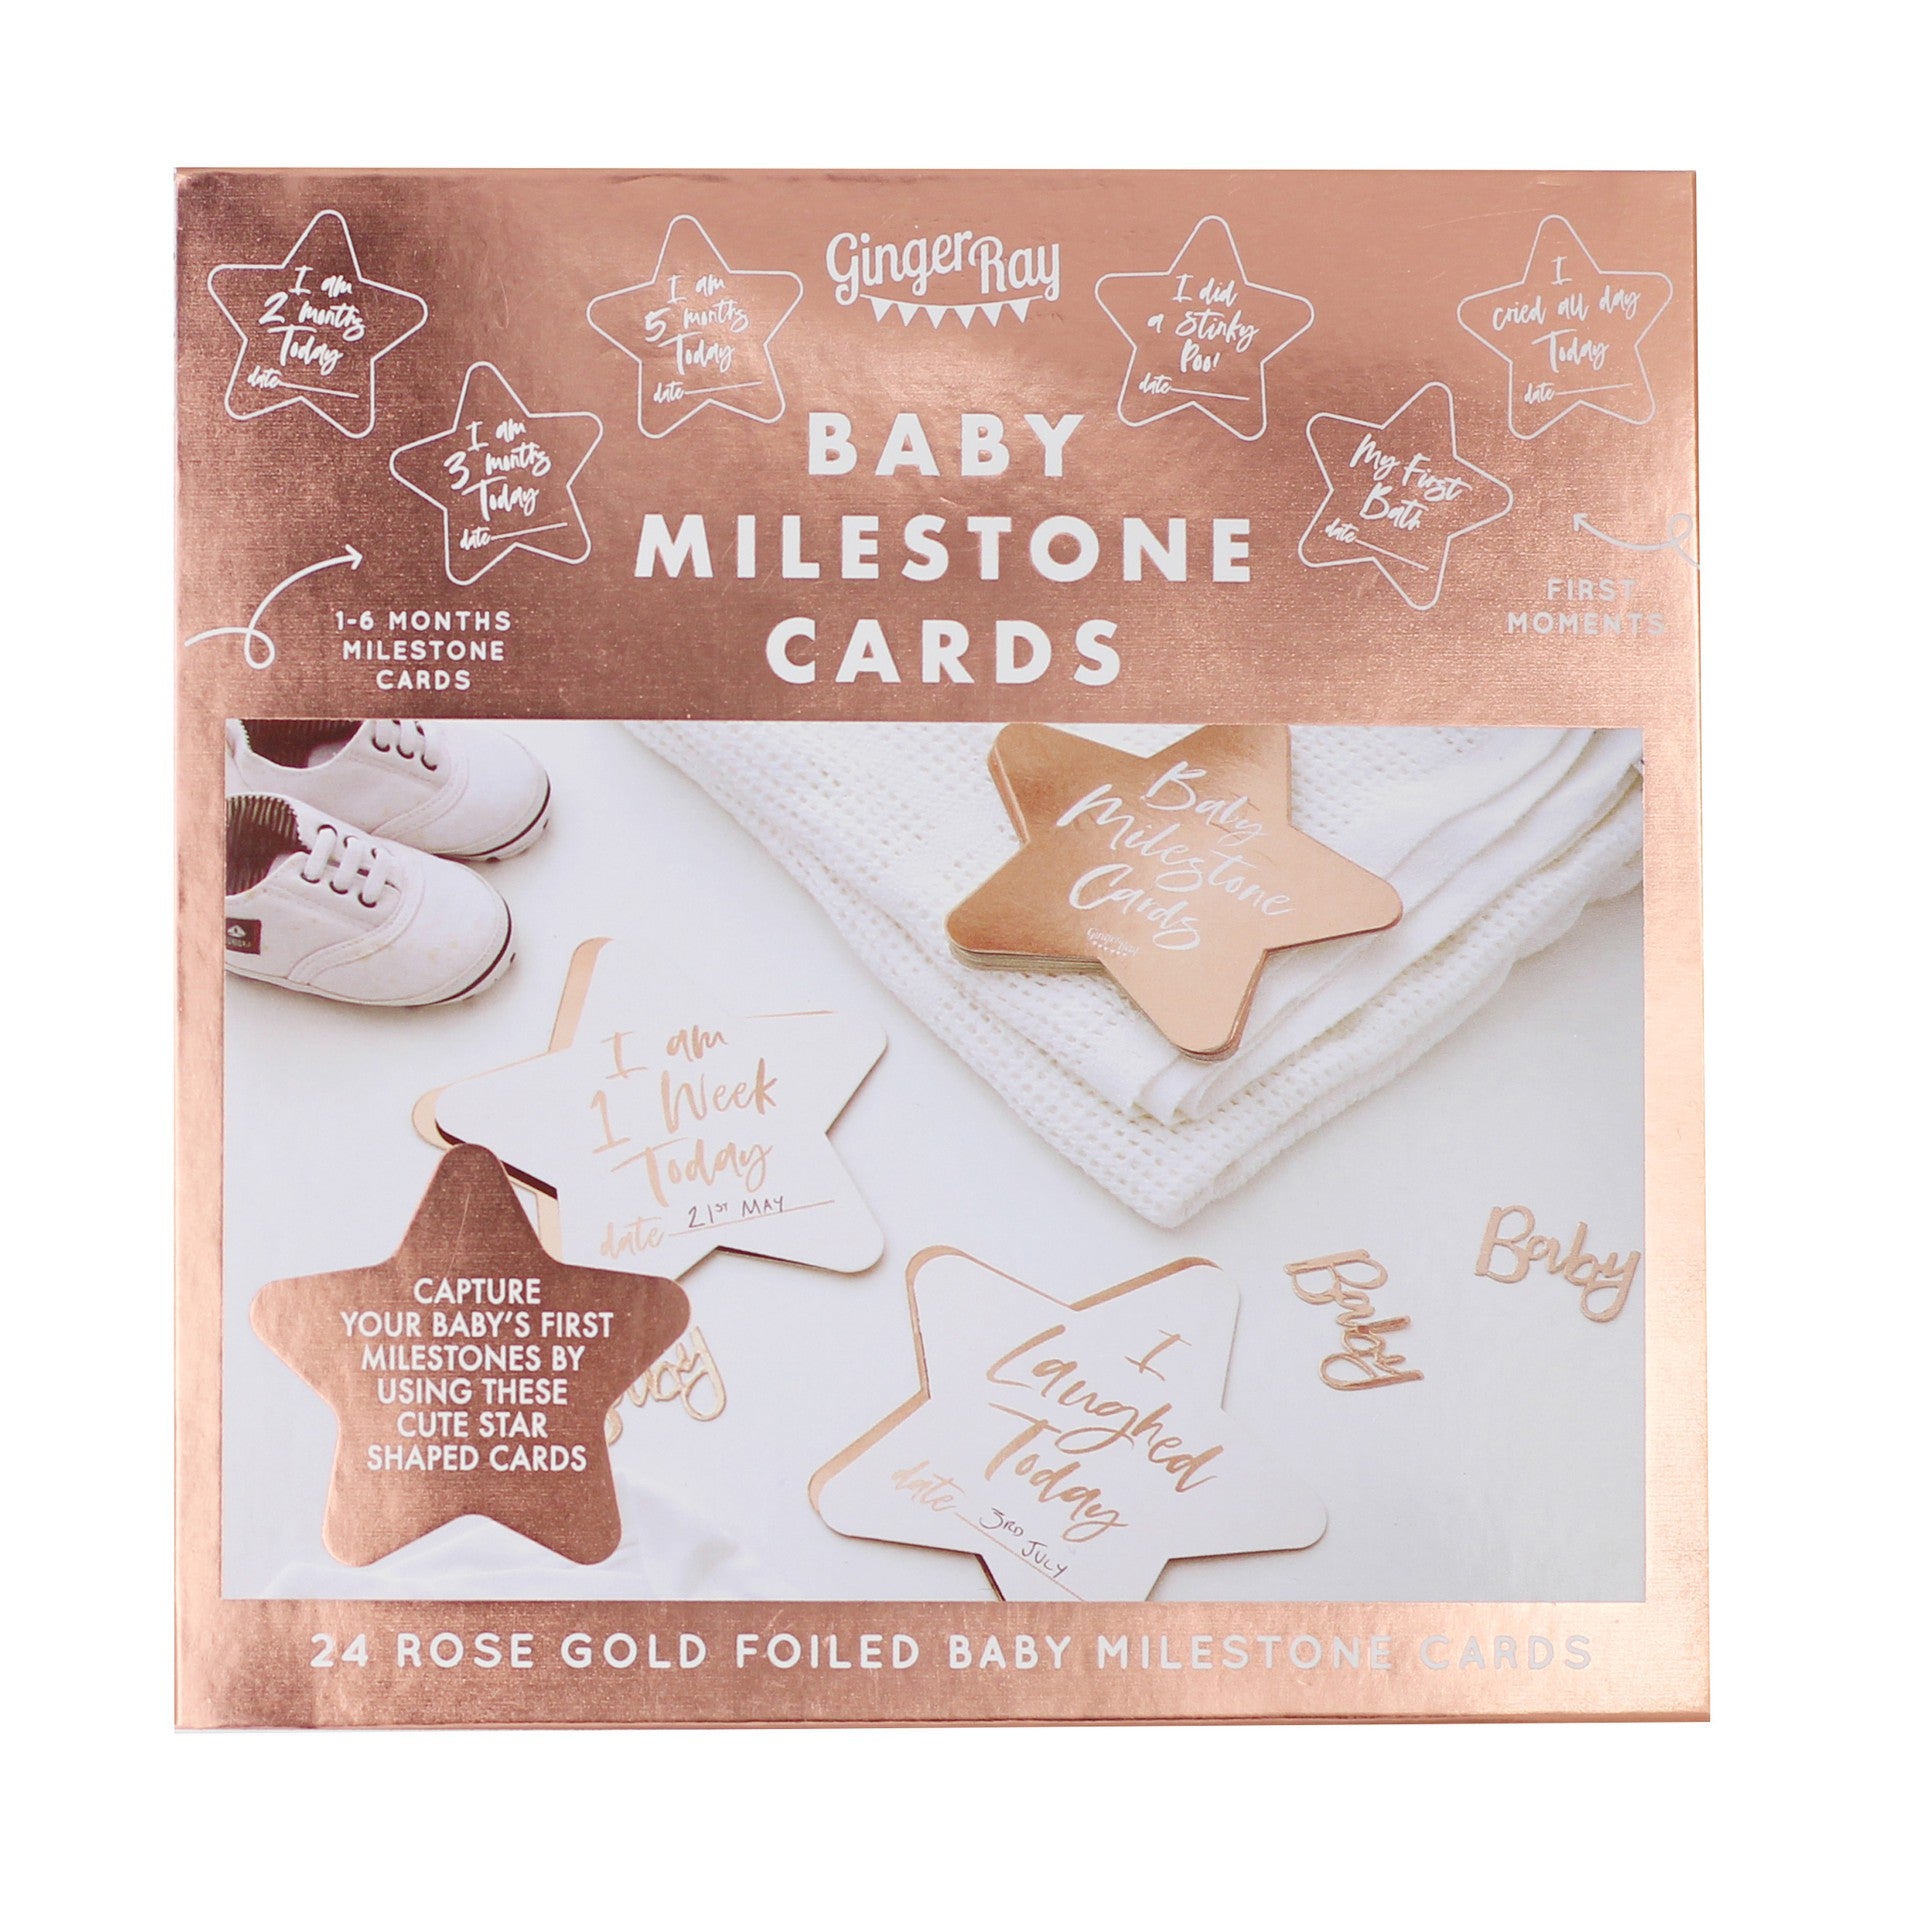 Rose gold and white star shaped baby milestone cards